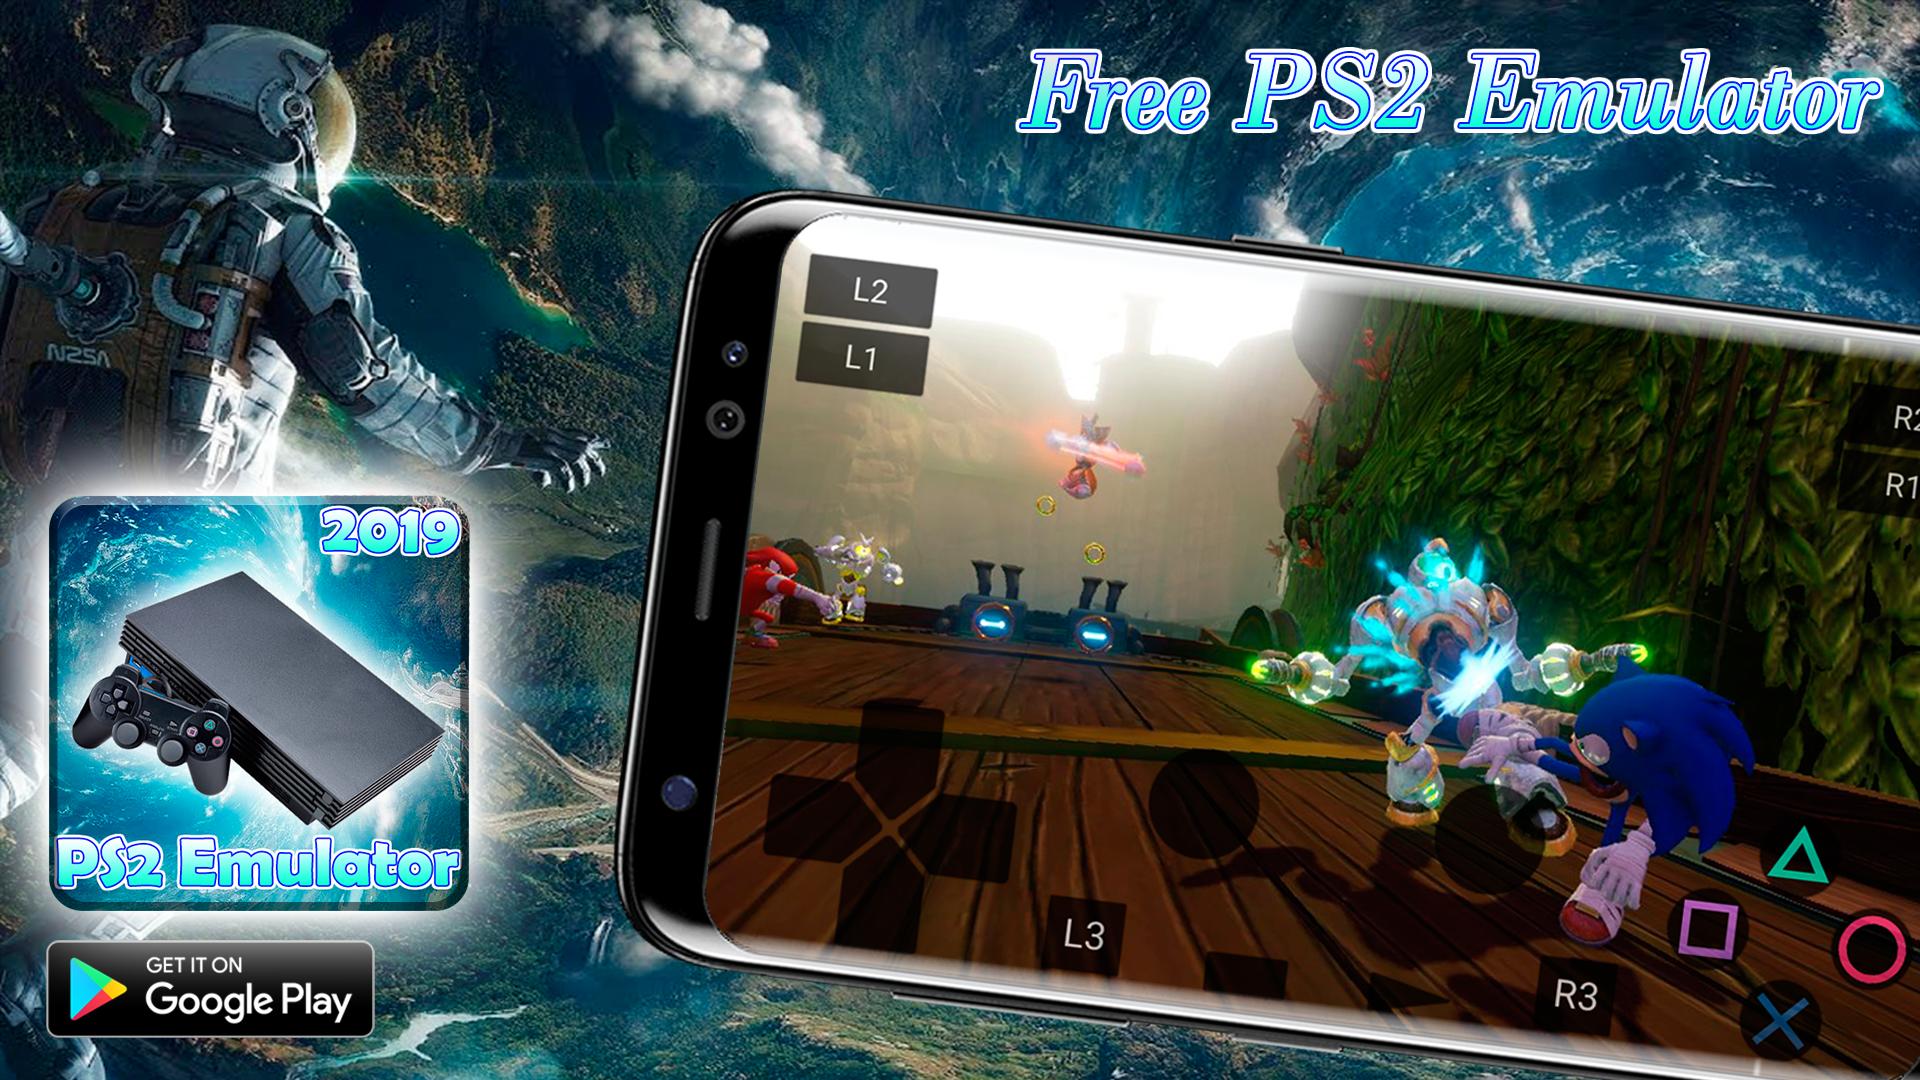 Free Pro PS2 Emulator Games For Android 2019 for Android ... - 